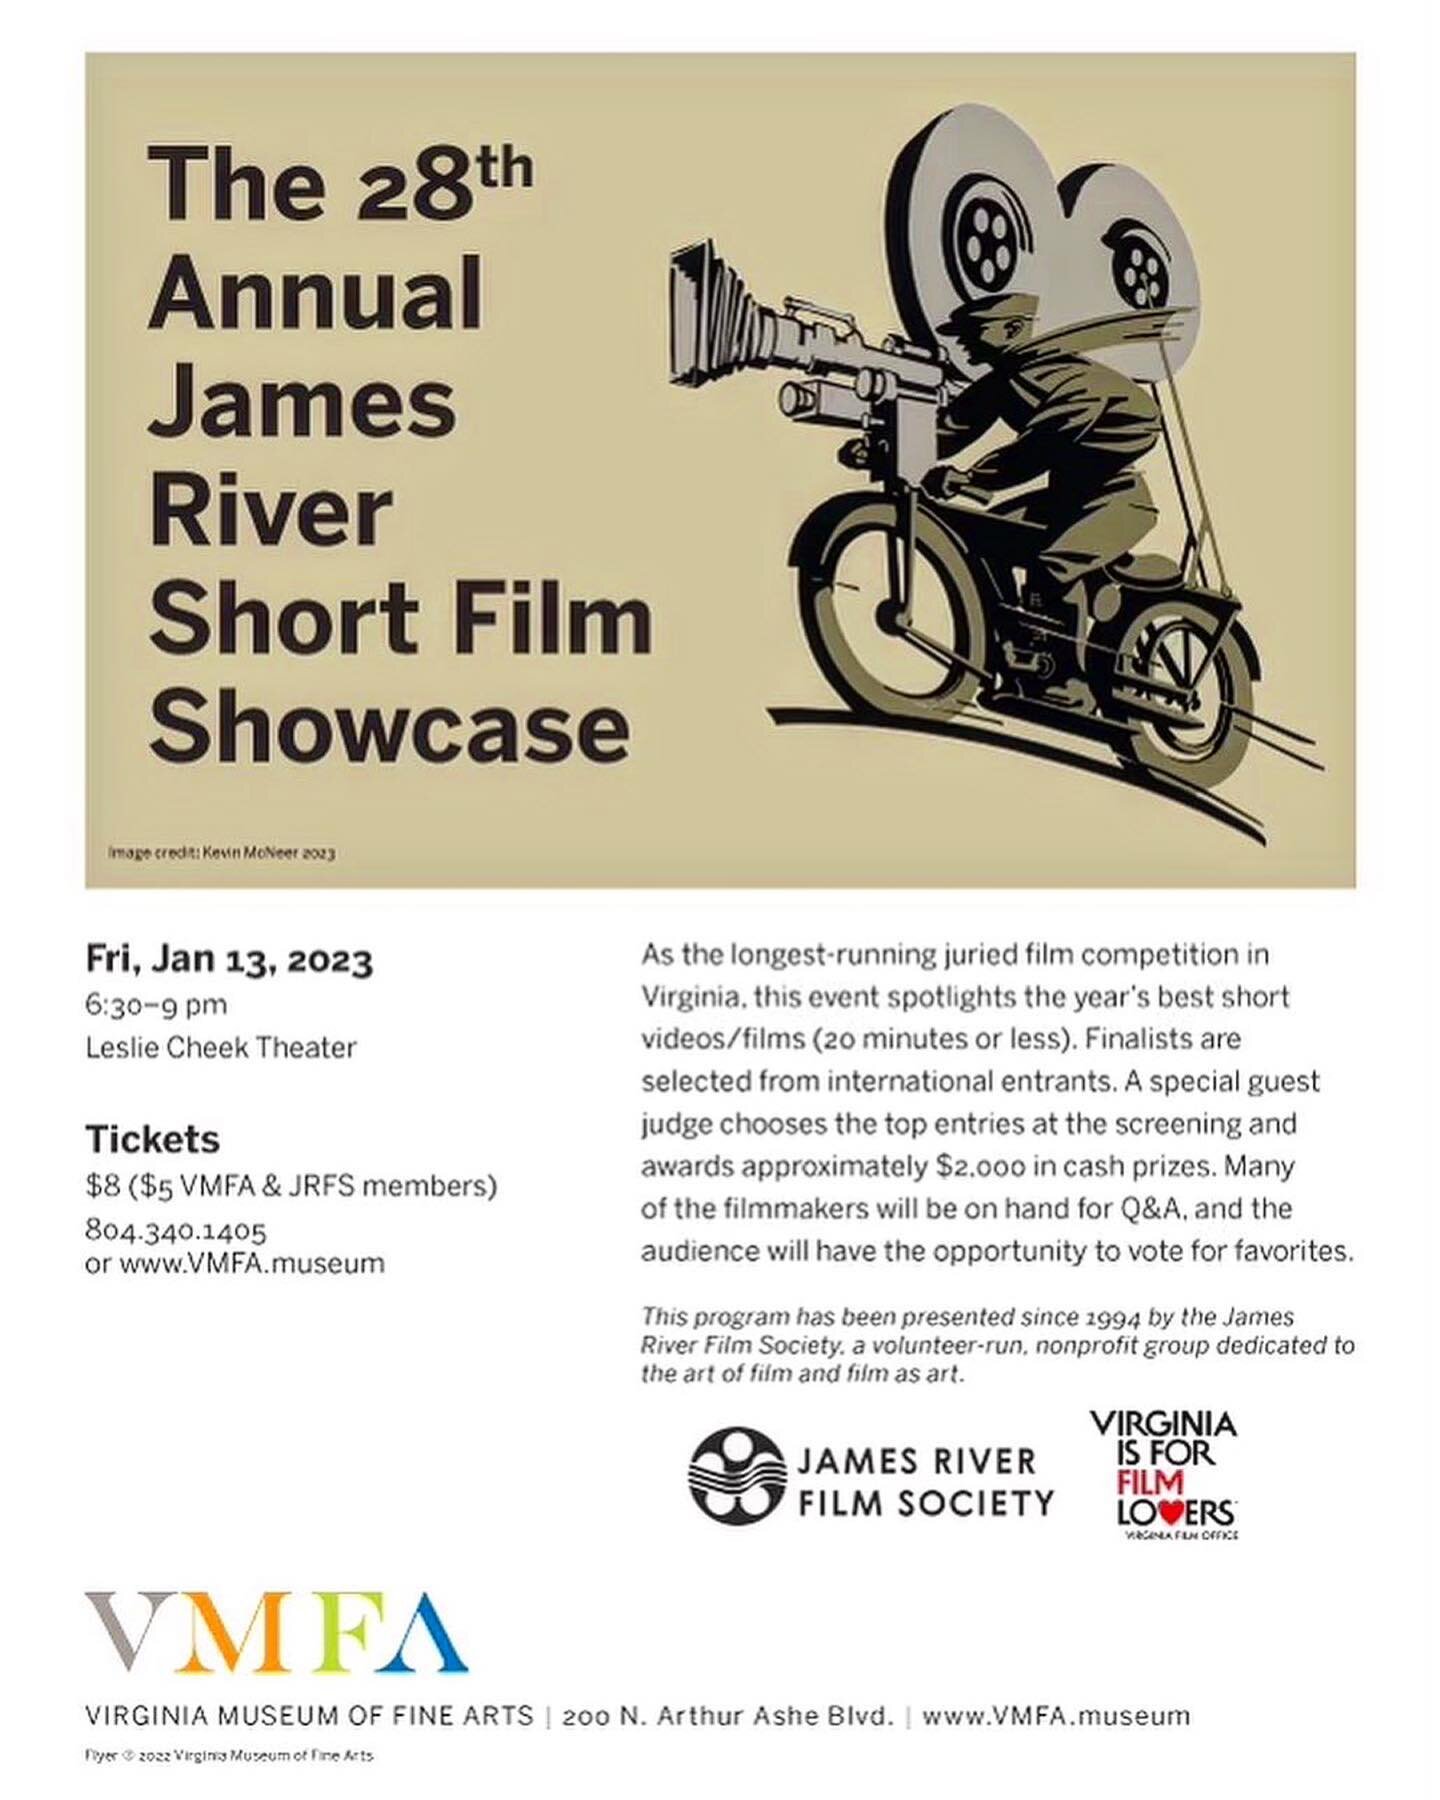 NEXT EVENT 📽️🎞️🤩
James River Short Film Showcase 
FRIDAY, January 13, 2023
Leslie Cheek Theater
@vmfamuseum 

TICKETS: (link in bio)
$8 ($5 VMFA/JRFS Members) 

James River Short Film Showcase 
is a mini-festival devoted to the short. 
The centerp